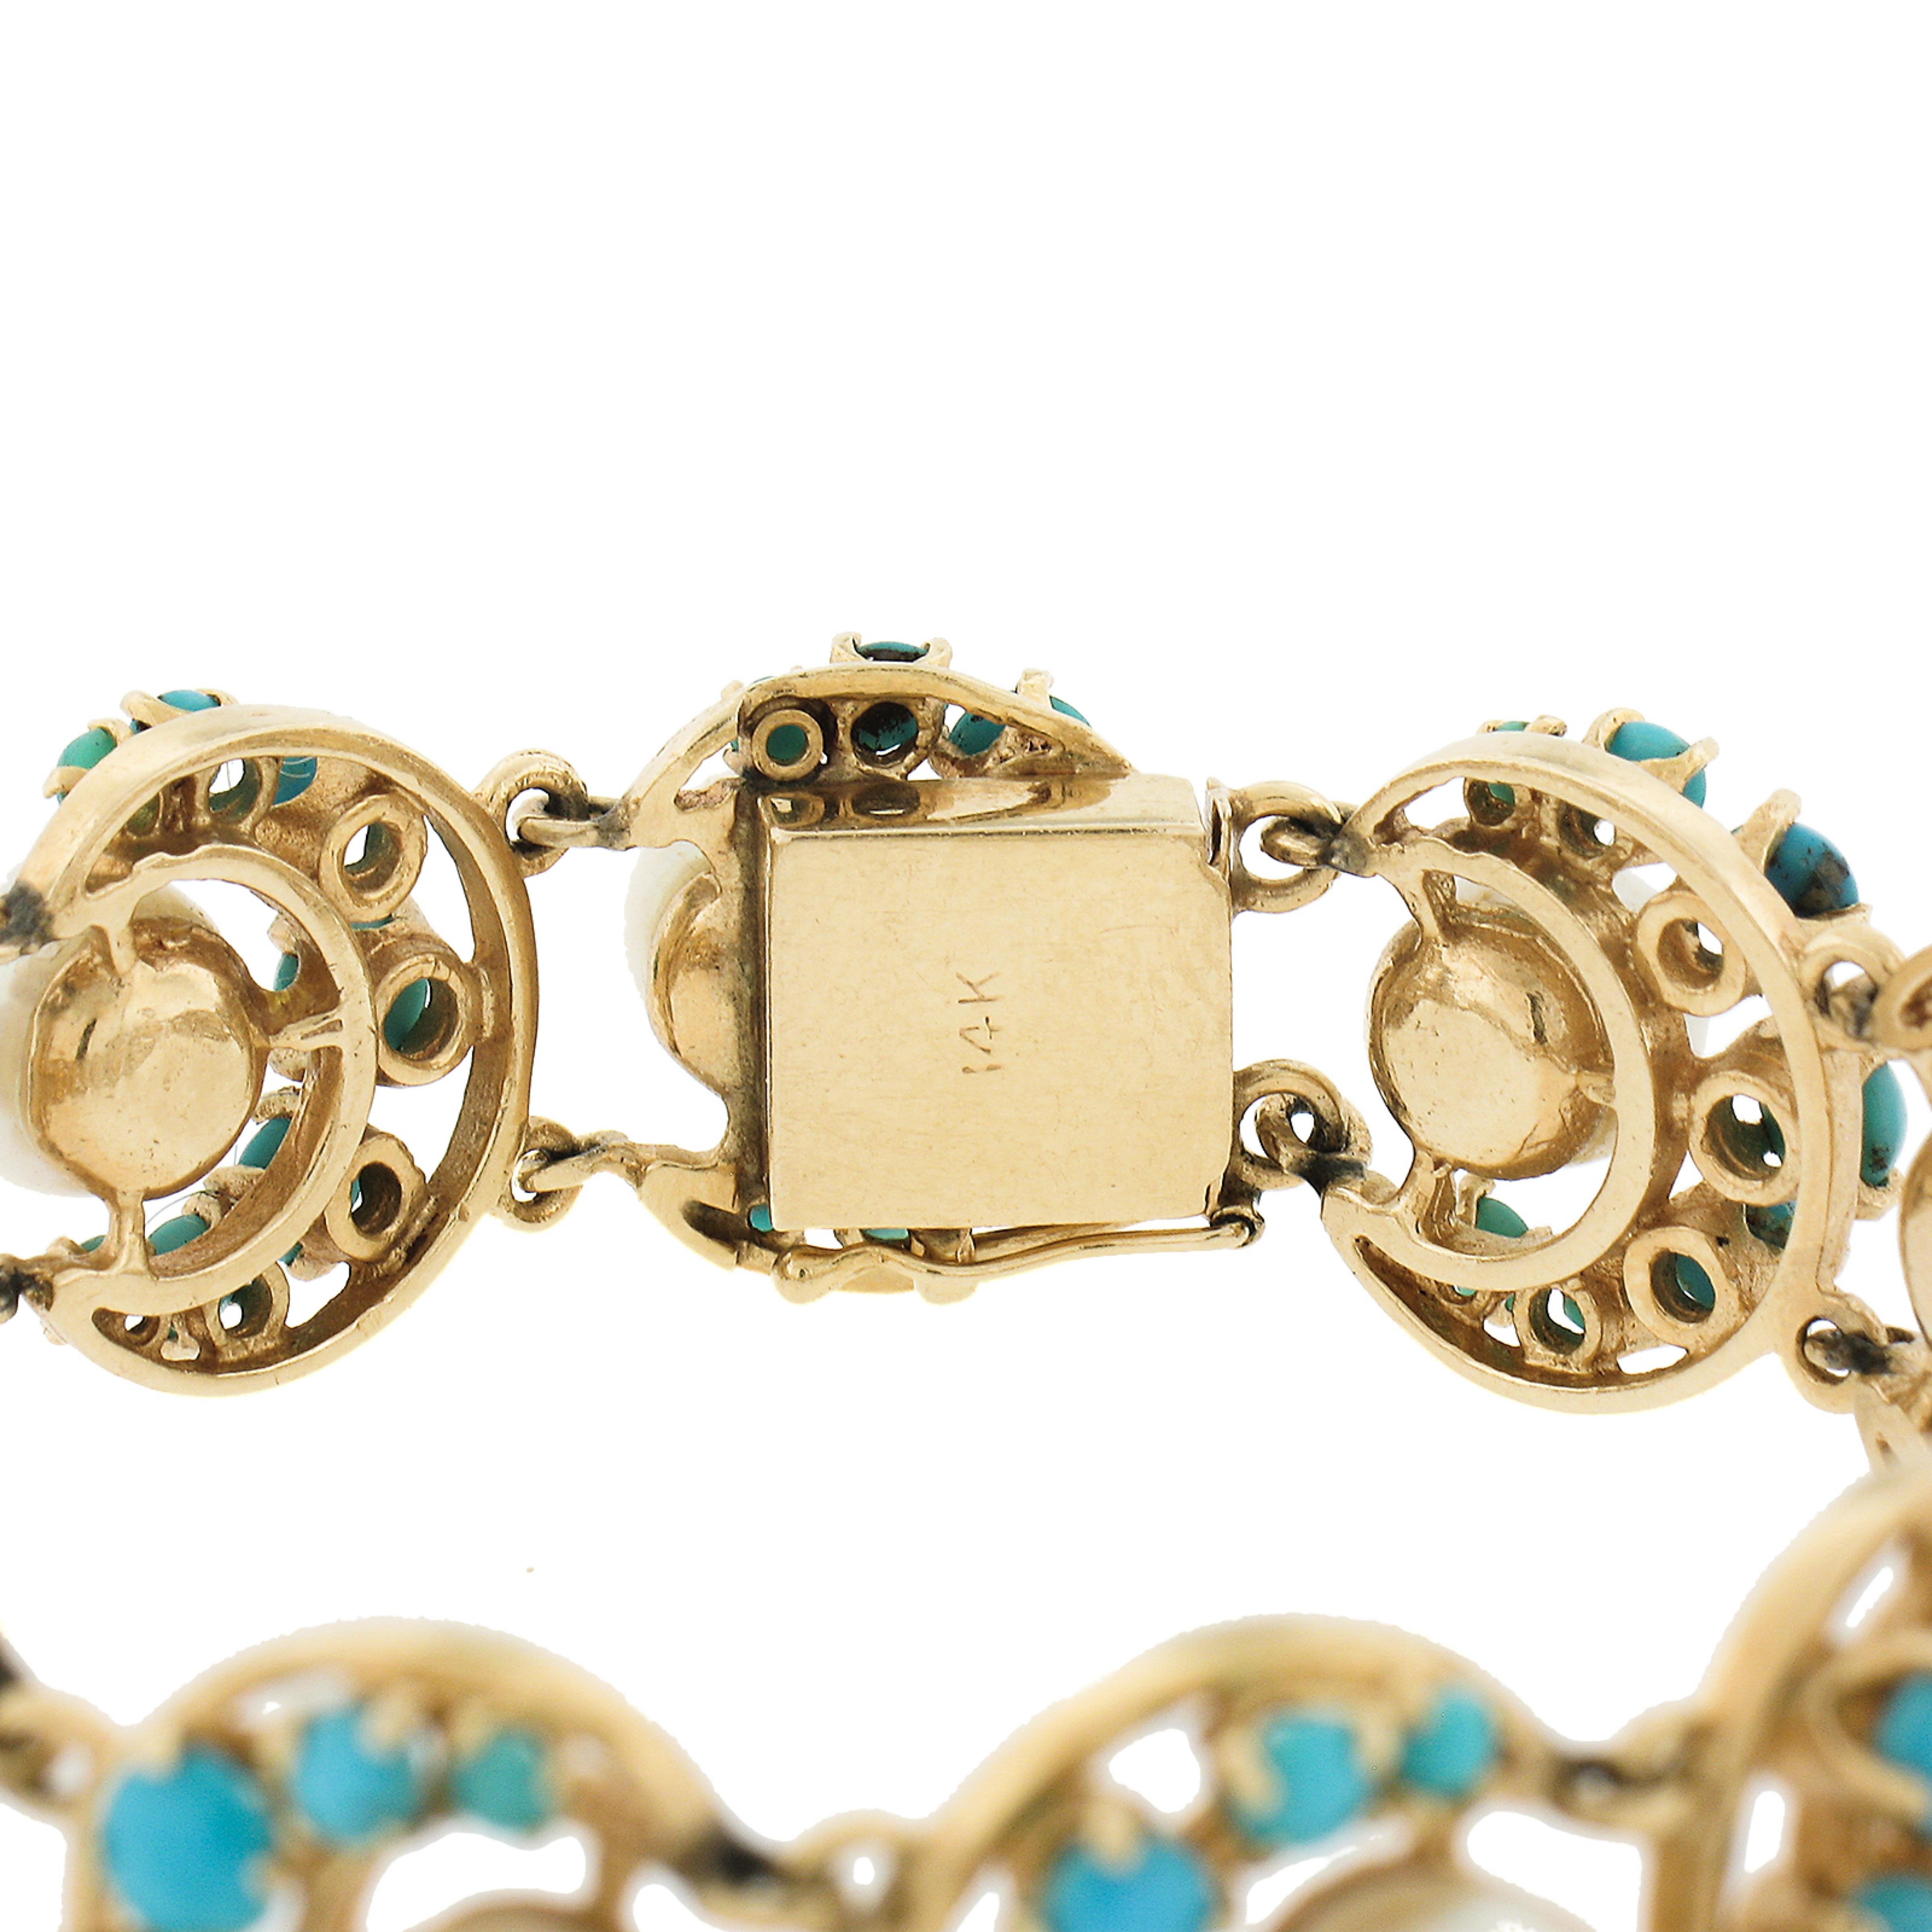 Vintage 14K Yellow Gold Pearls & Turquoise Horseshoe or Crescent Link Bracelet In Excellent Condition For Sale In Montclair, NJ